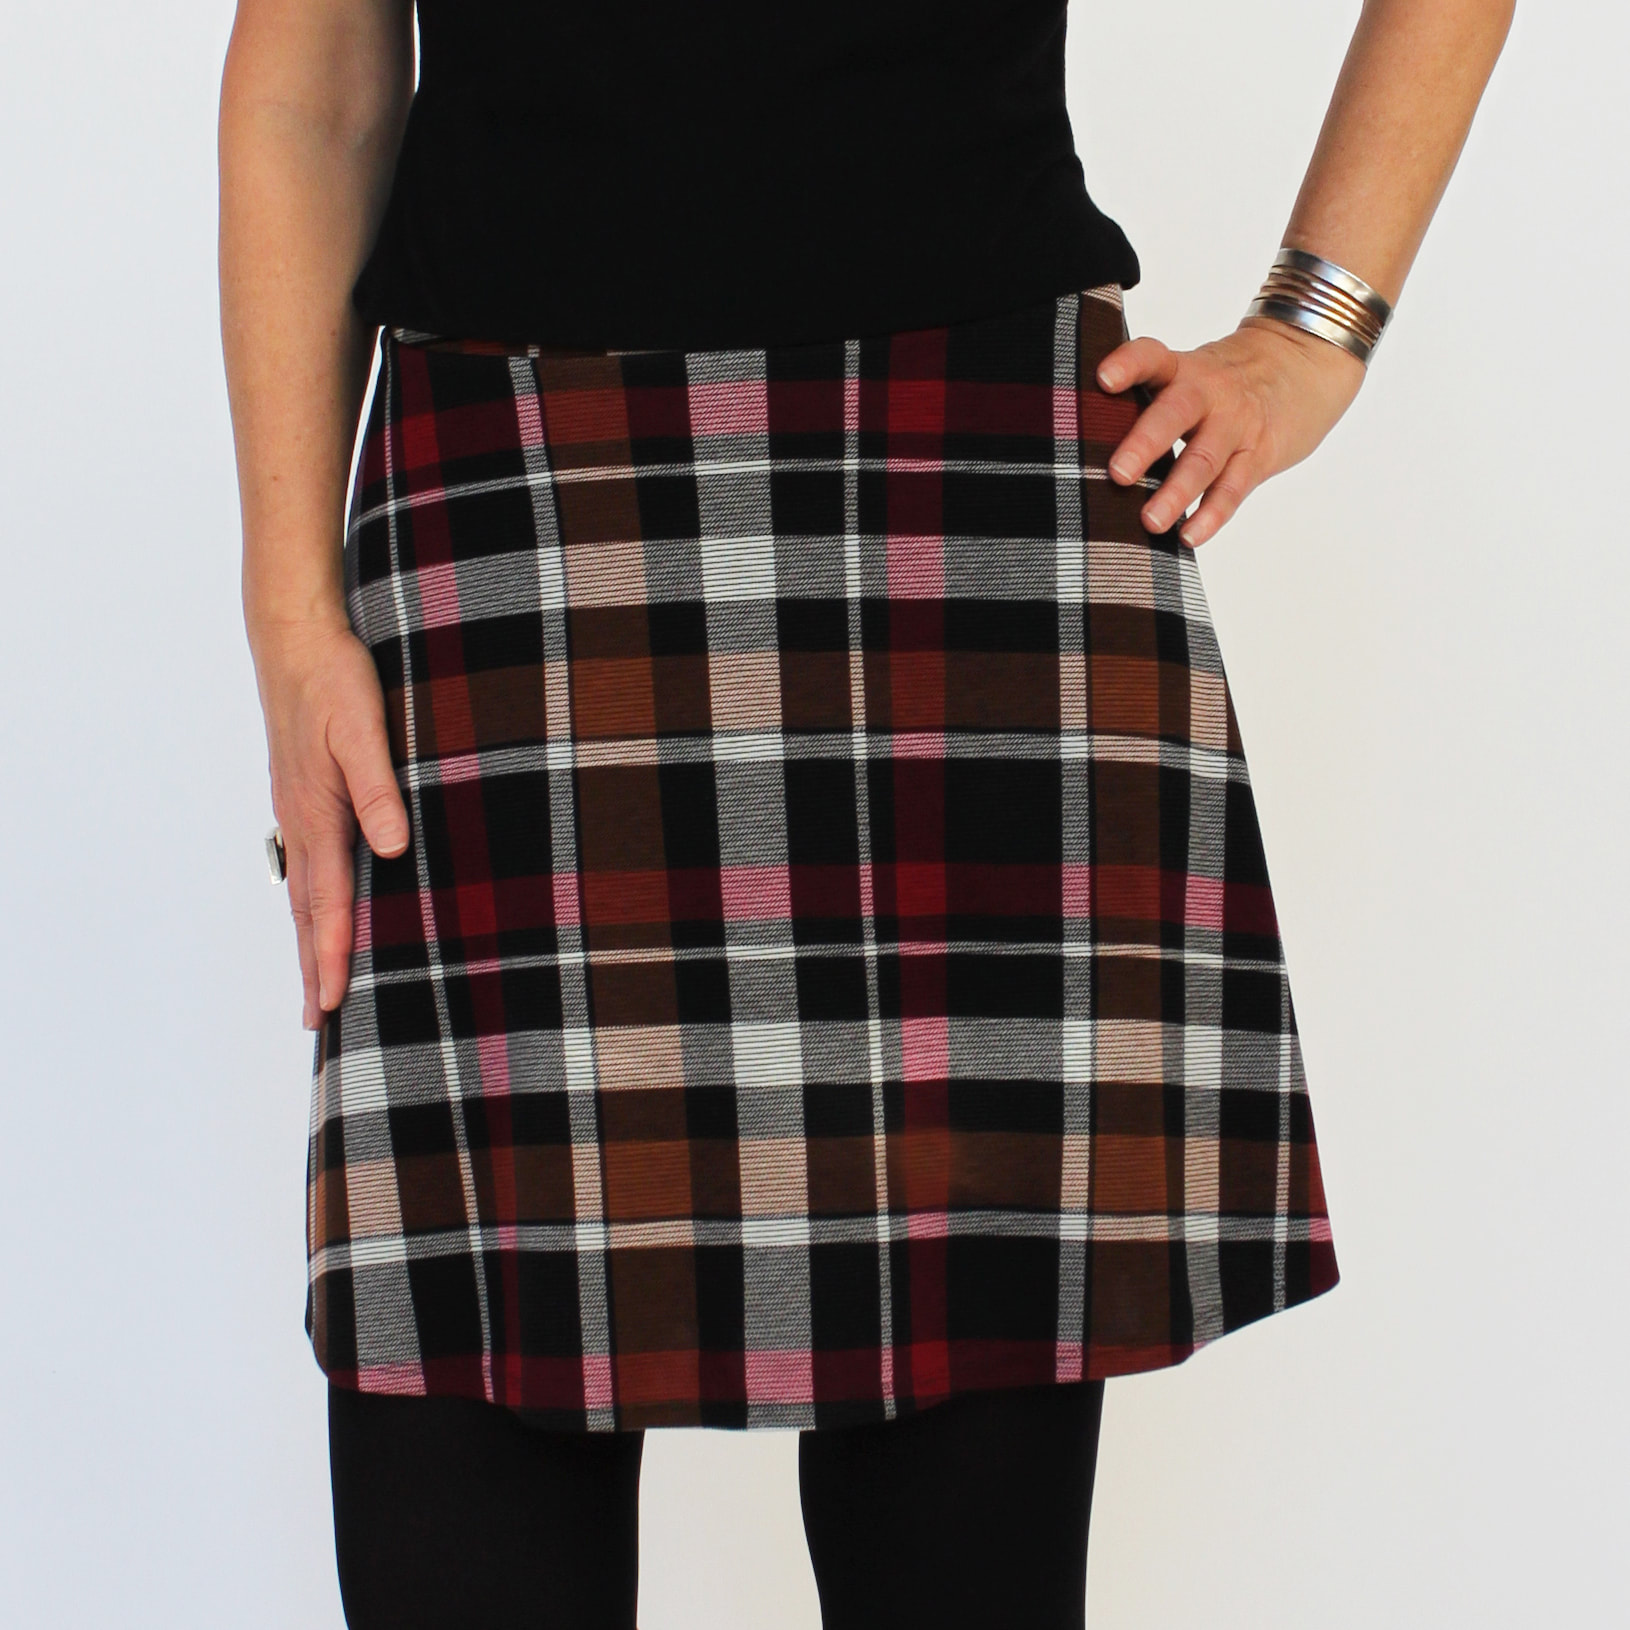 A-line Skirt in Multi Color Plaid